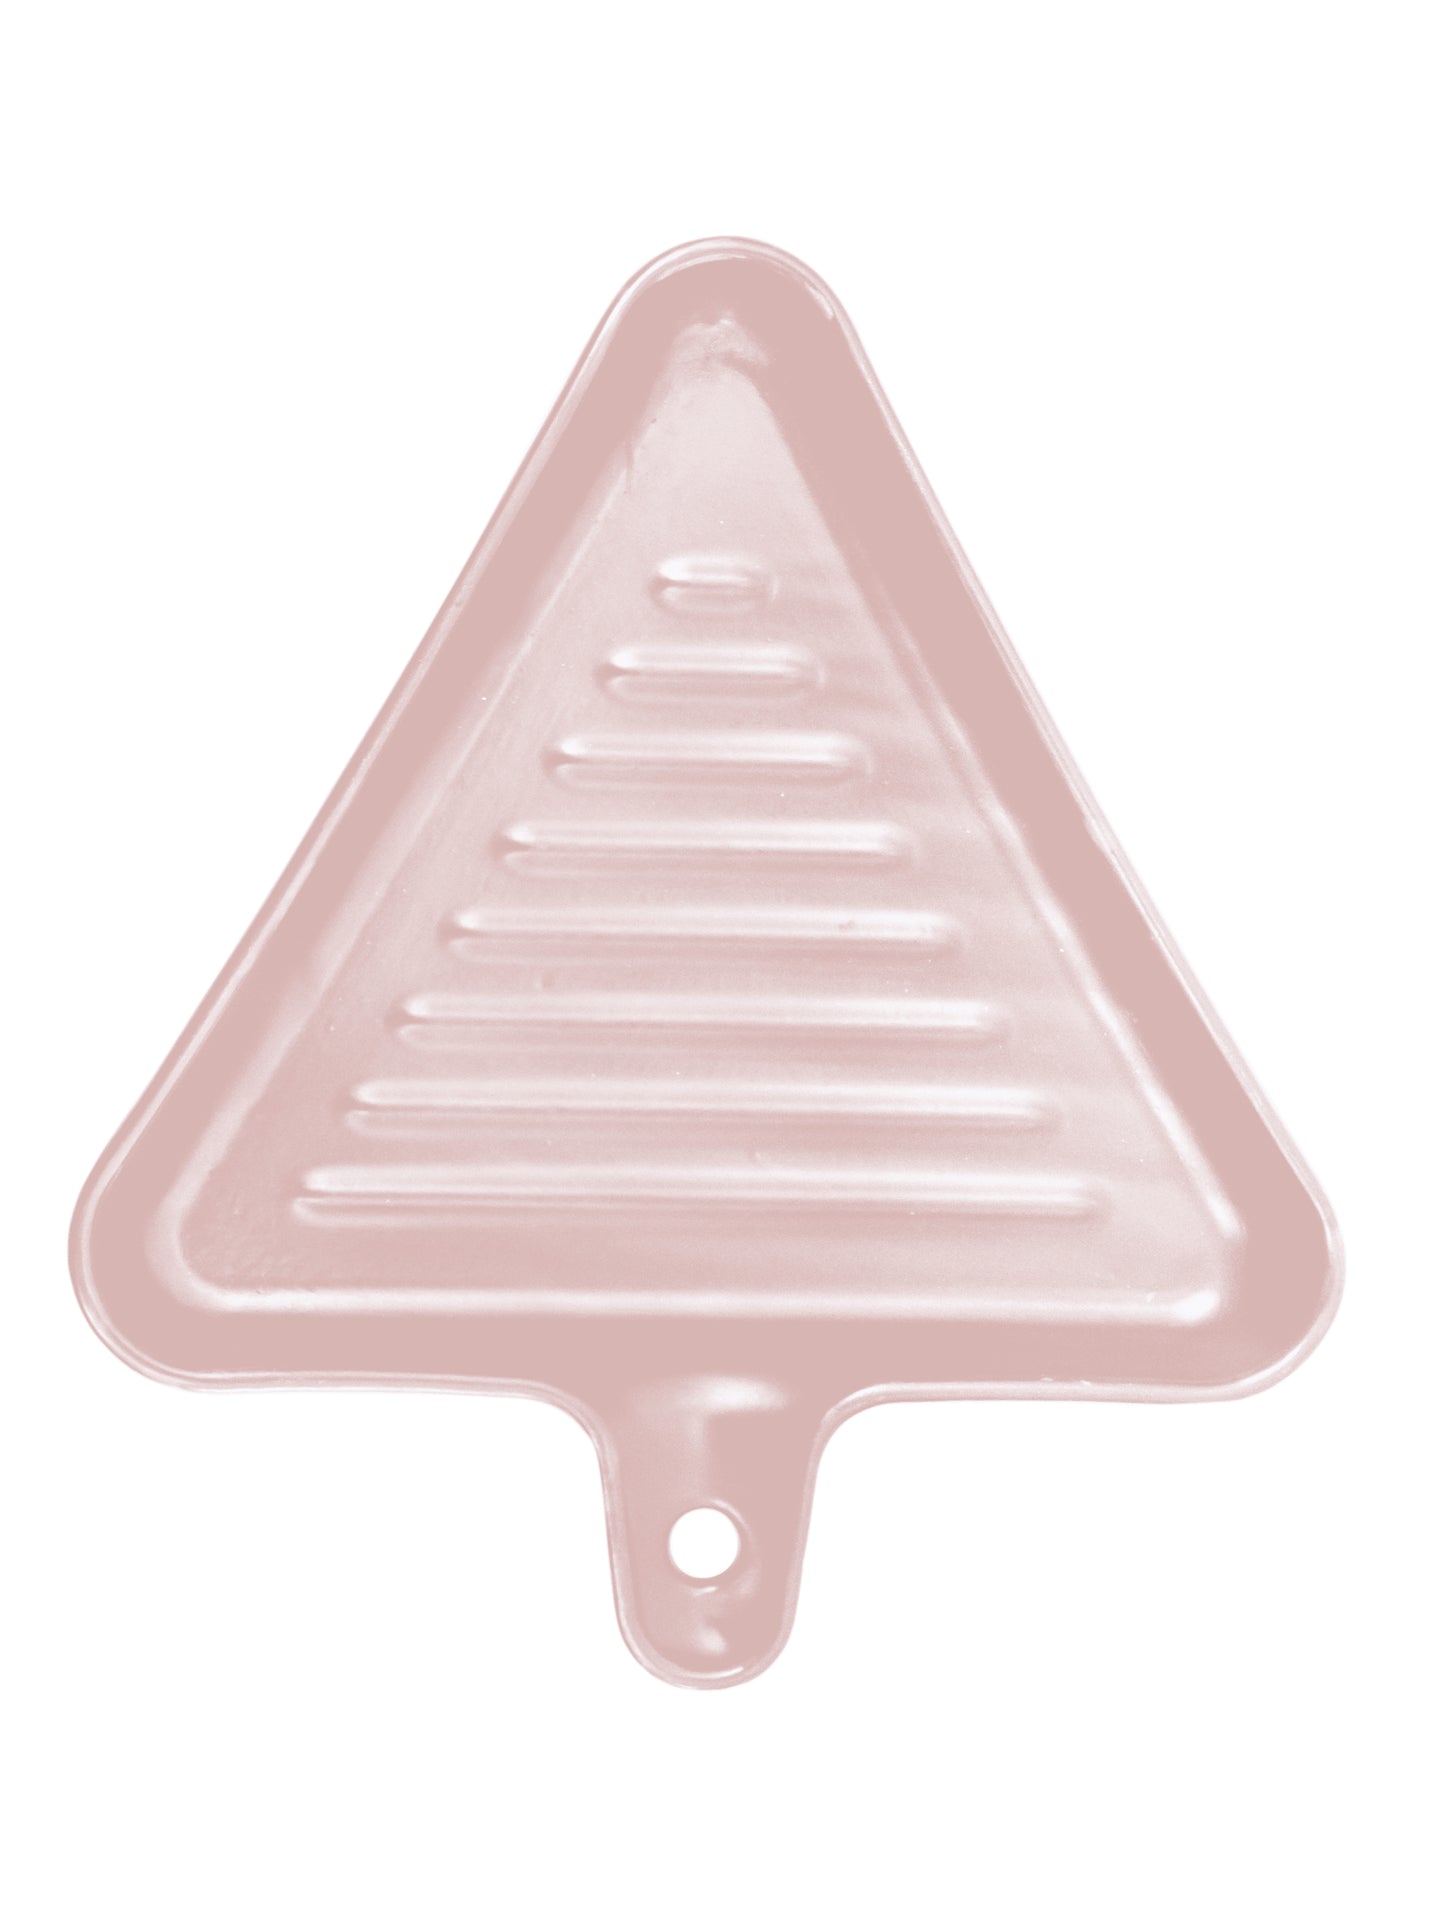 Ceramic Triangle Grill Plates for Serving, Pink